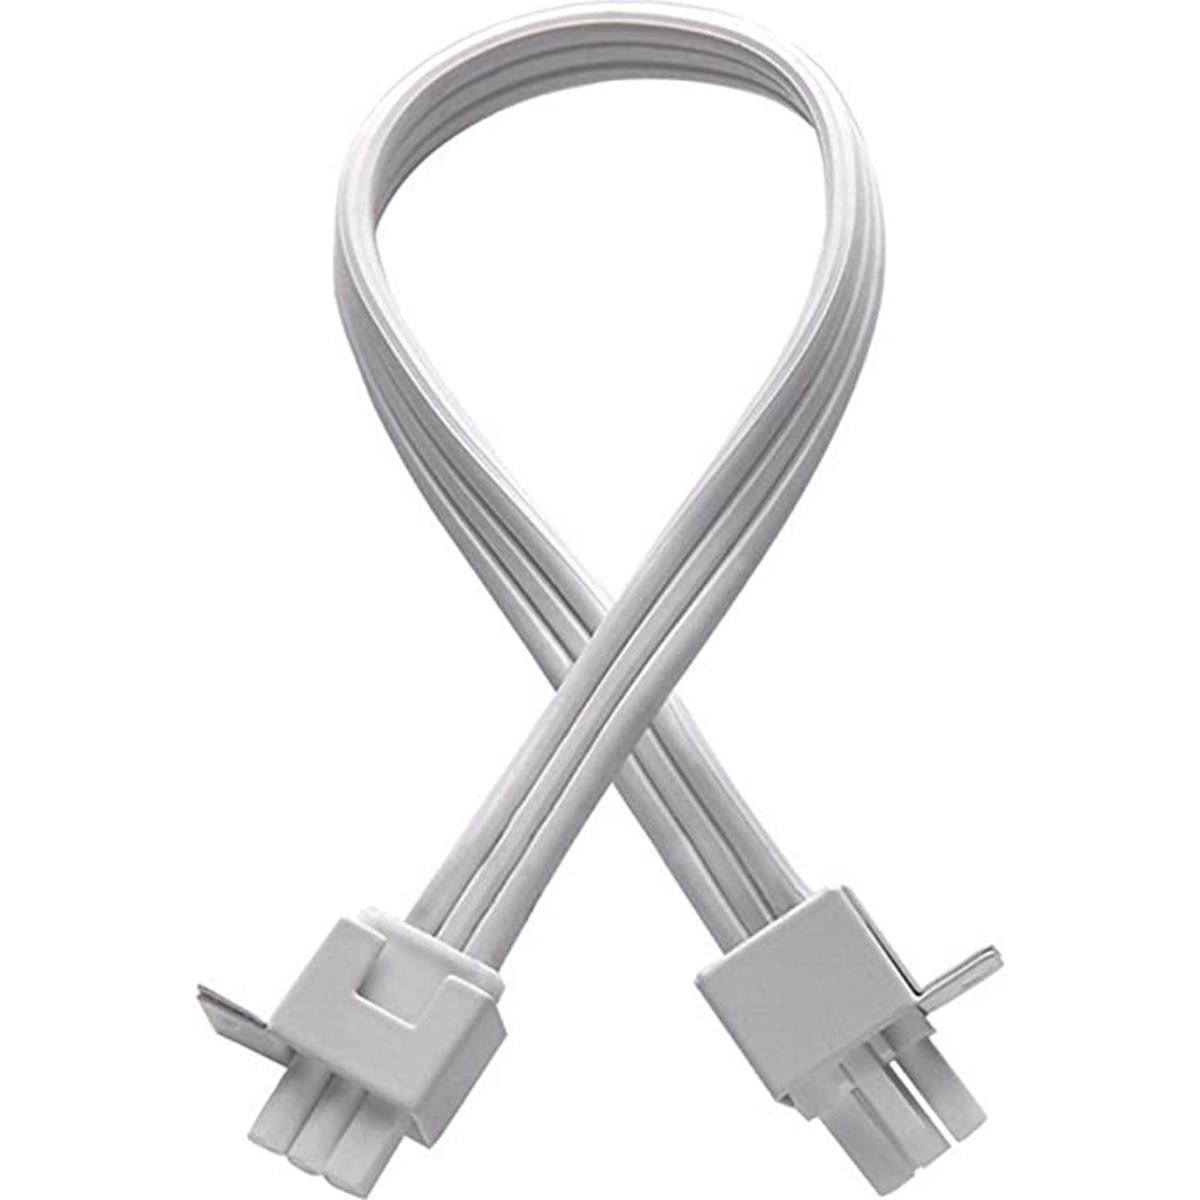 12in. Interconnect Cable For Undercabinet Lights, White Finish